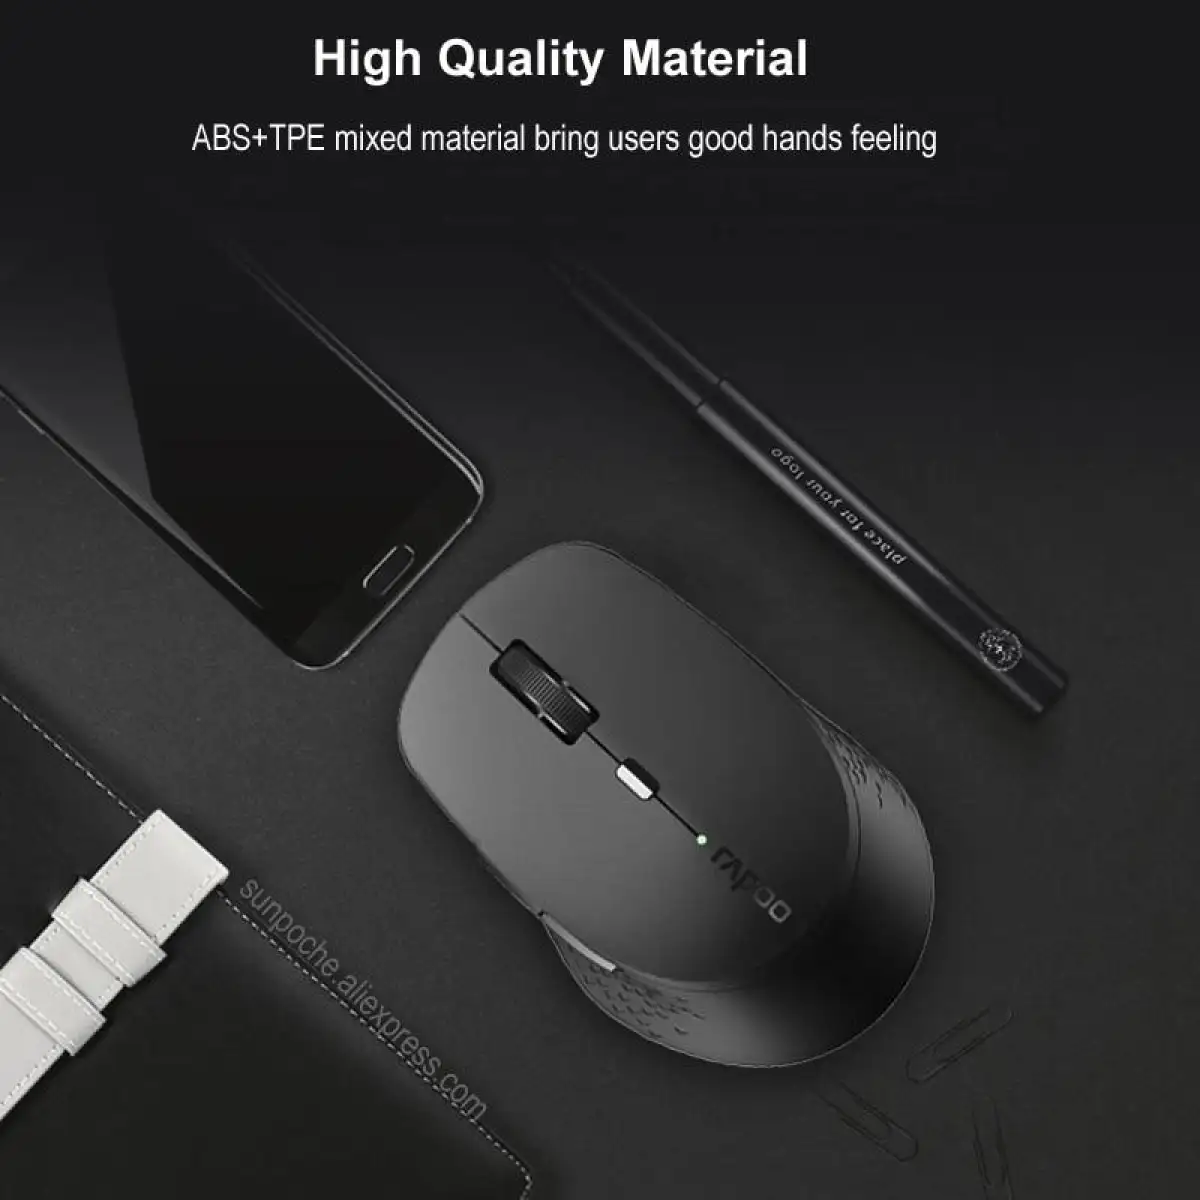 New Rapoo M300 Multi-Mode Silent Wireless Mouse with Bluetooth 3.0/4.0 RF 2.4GHz for 3 Devices Connection Laptop Smart-Phone | Lazada